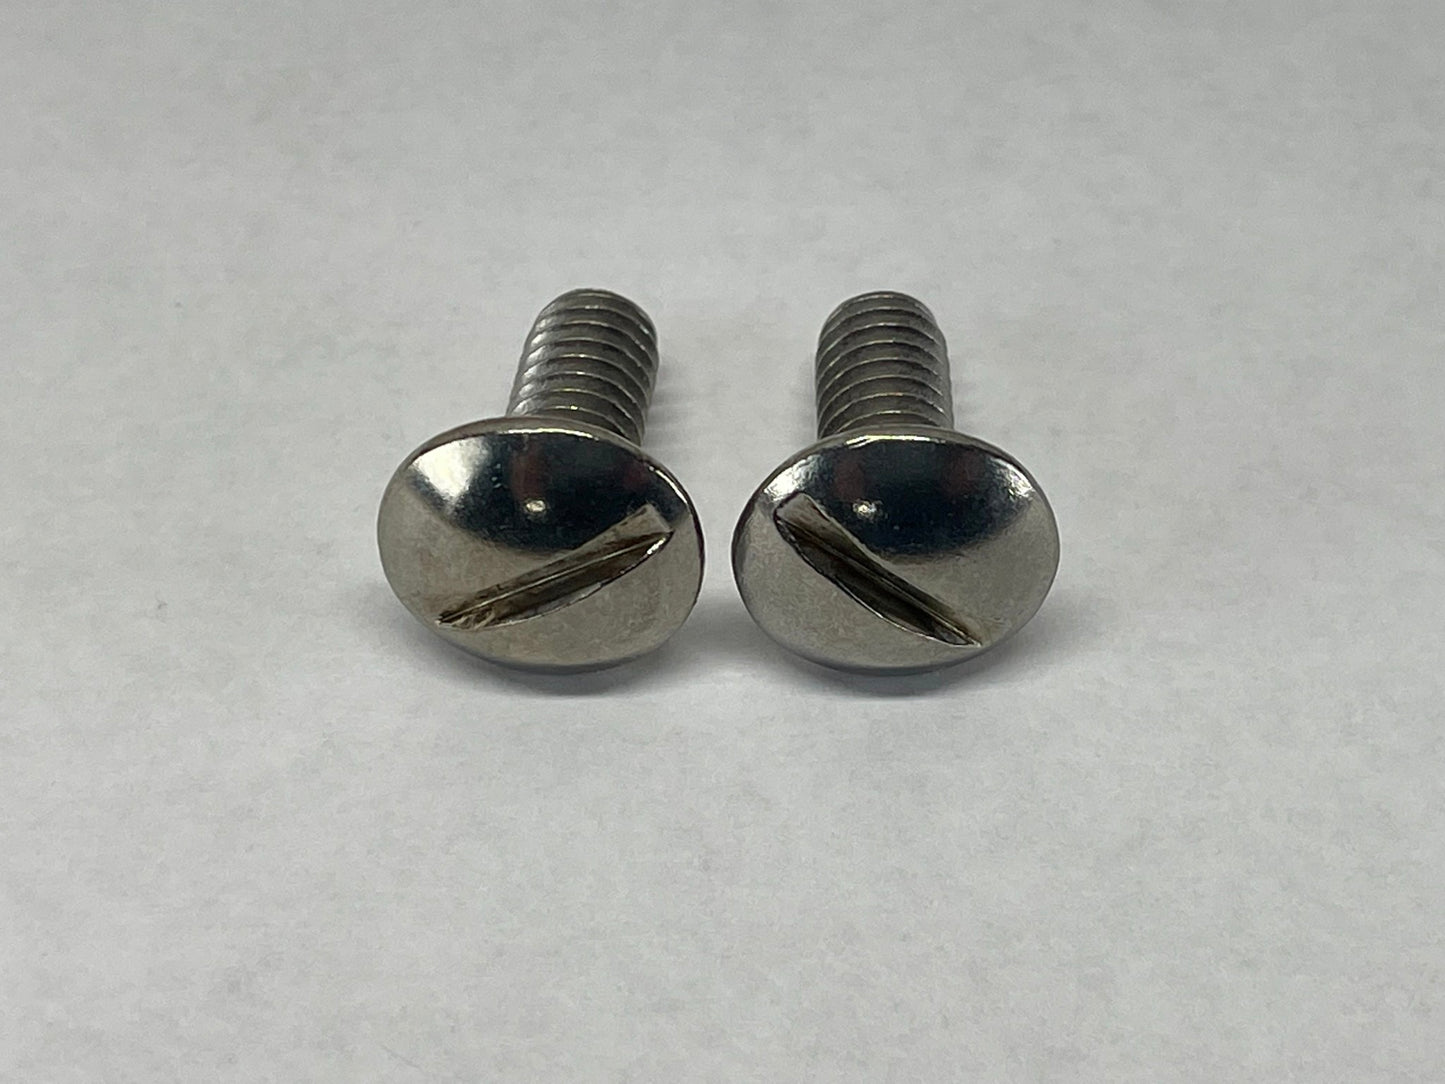 Federal Signal Aerodynic  - Pair (2) of Dome Lens Screws - Stainless Steel - New